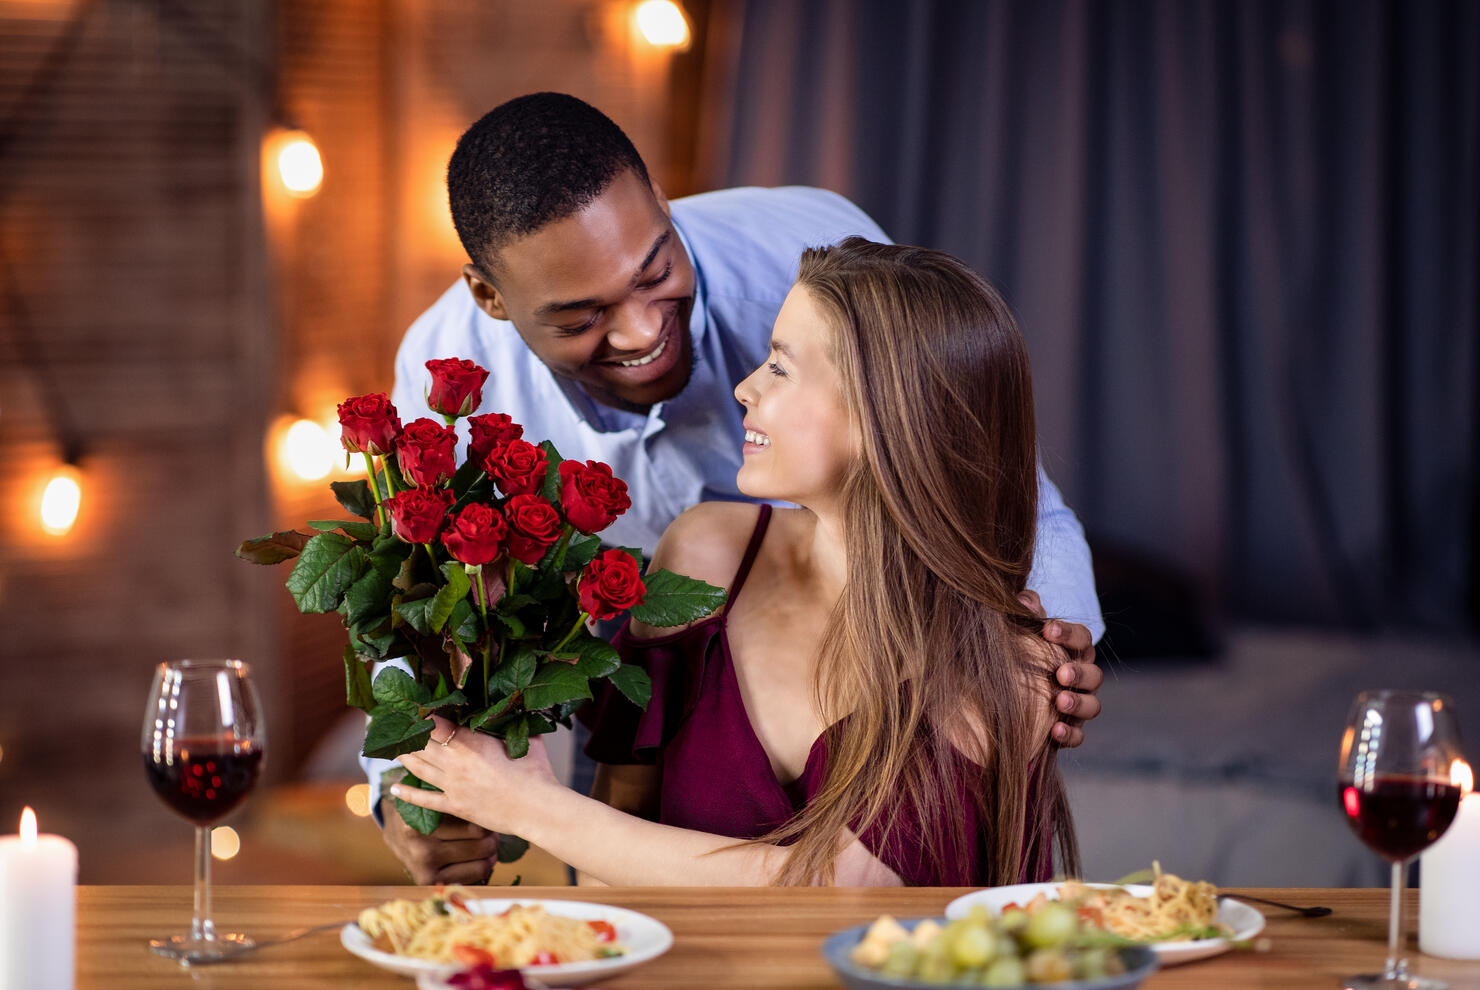 Loving African American Guy Surprising His Beautiful Girlfriend With Roses Bouquet